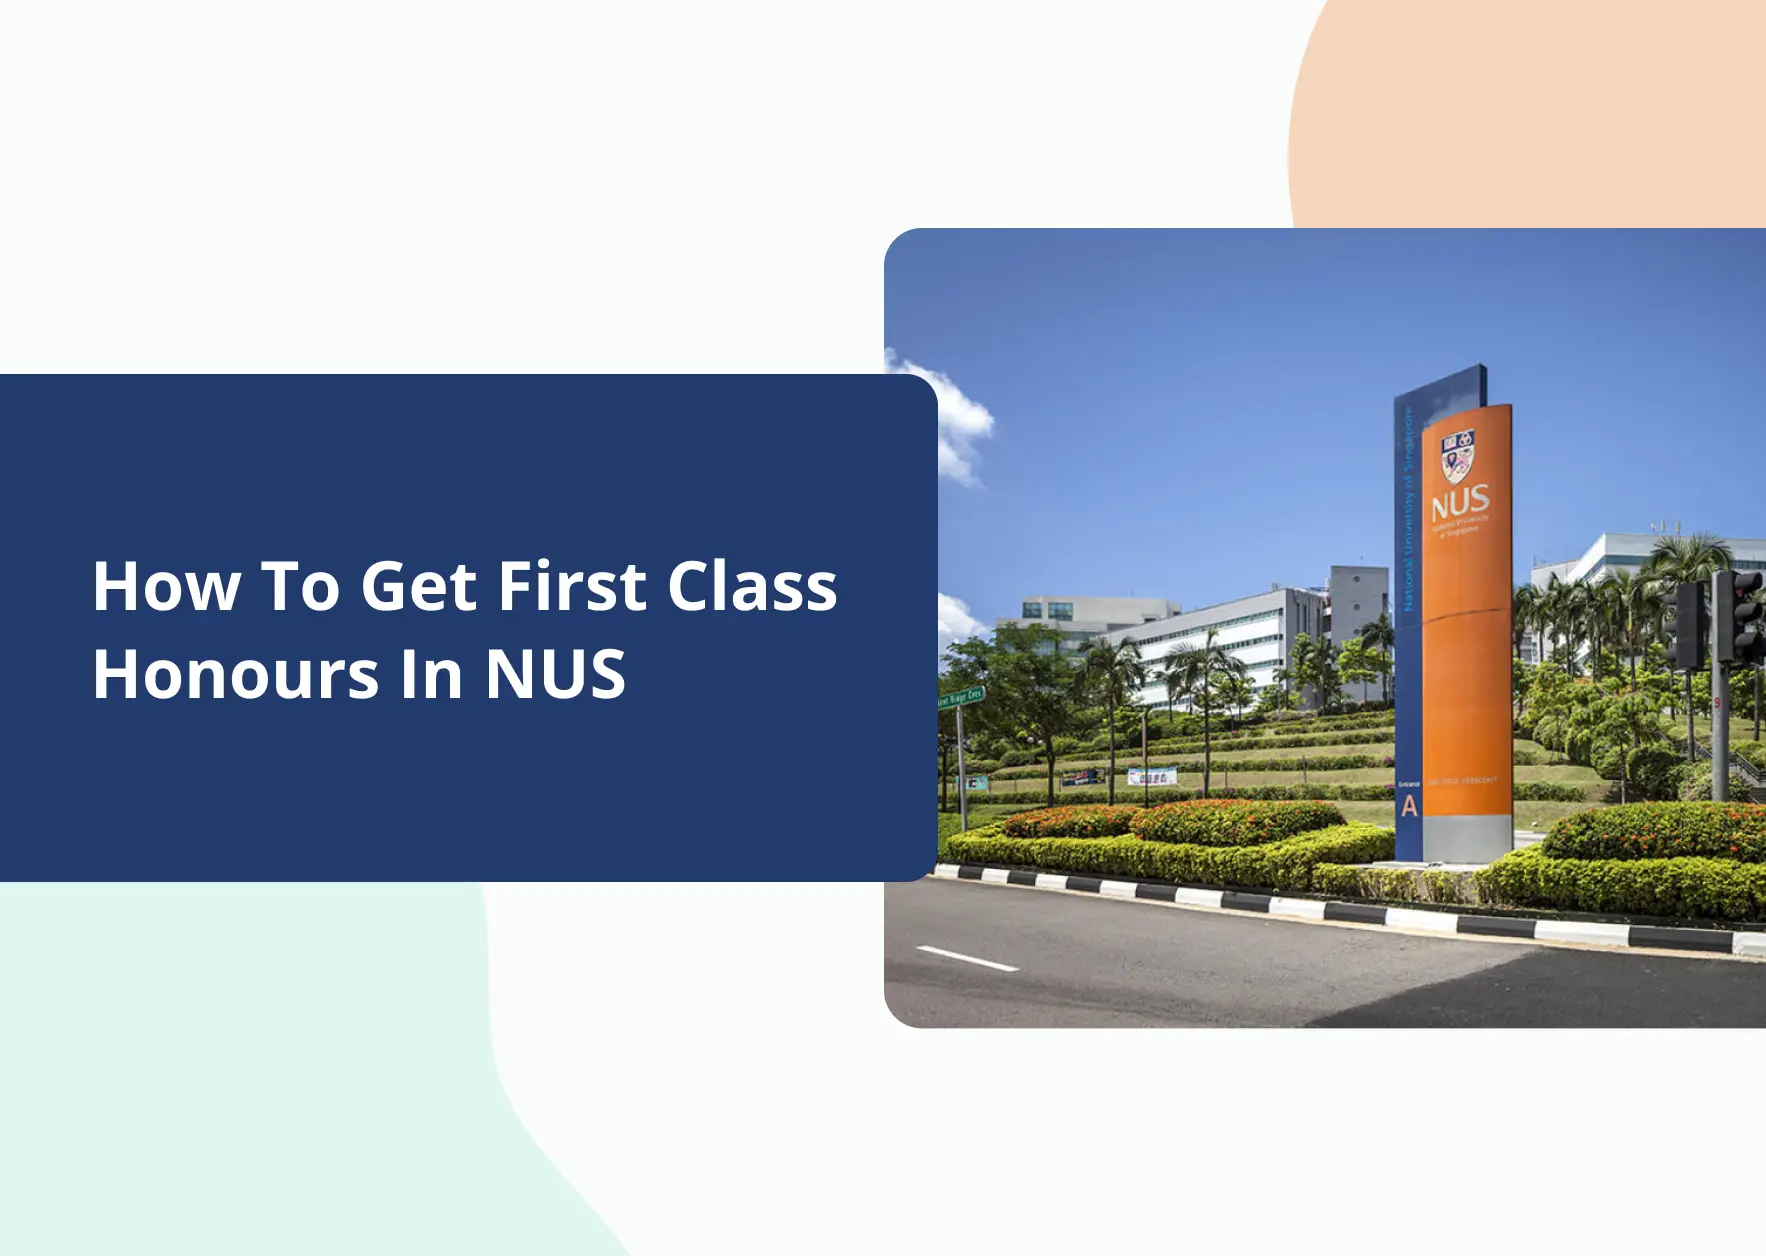 How To Get First Class Honours In NUS